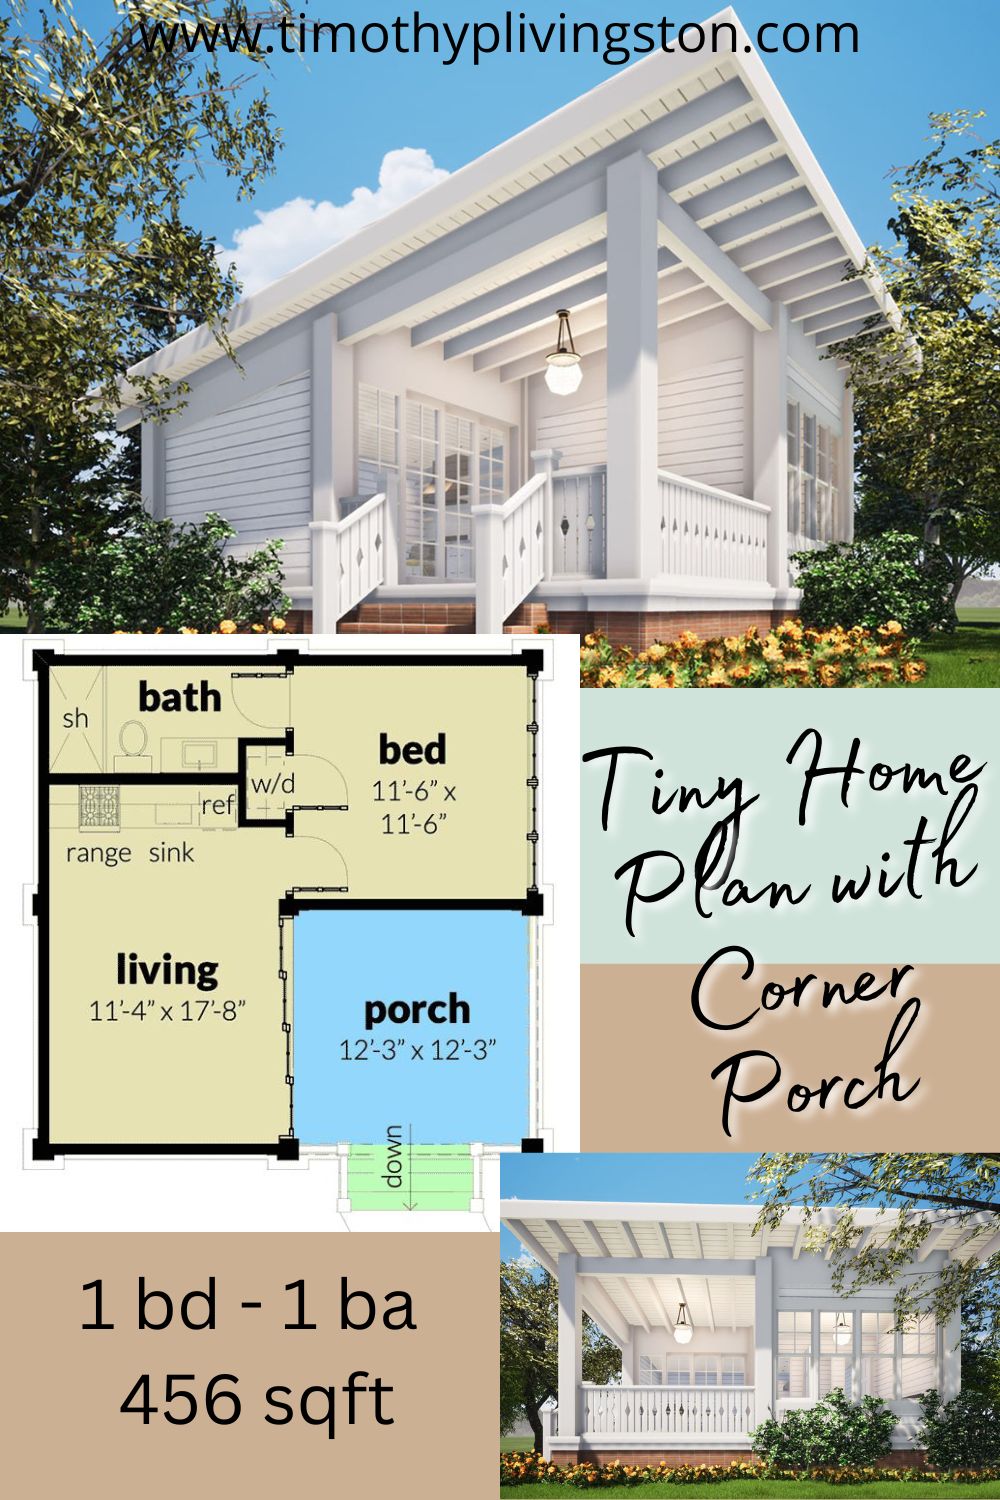 Tiny Home Plan with Corner Porch small house plans